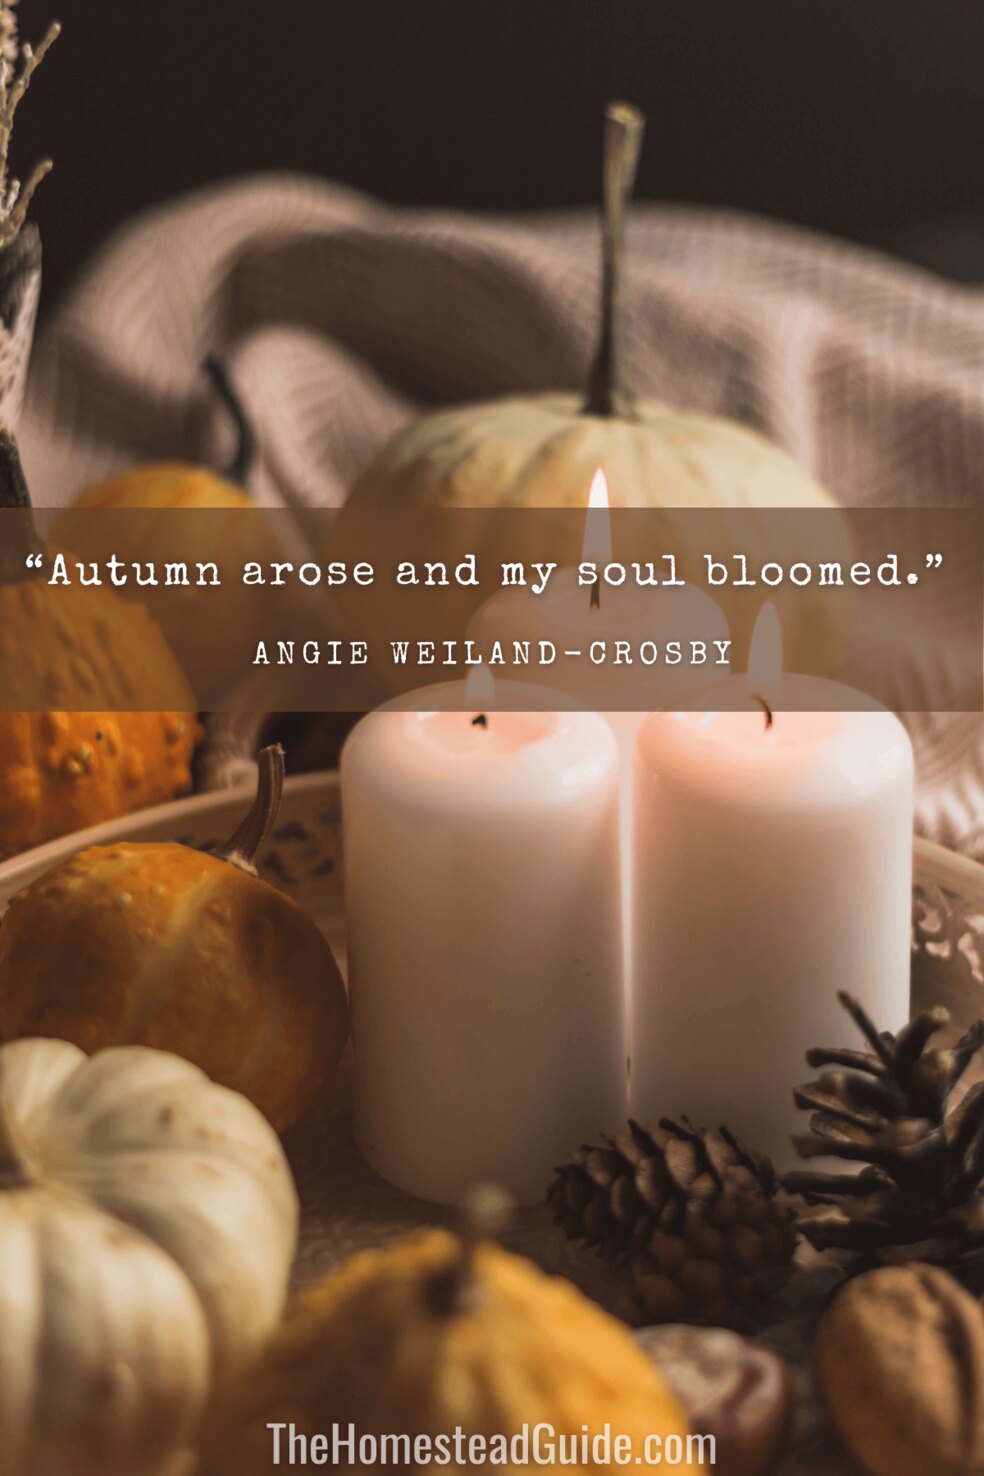 Autumn arose and my soul bloomed.